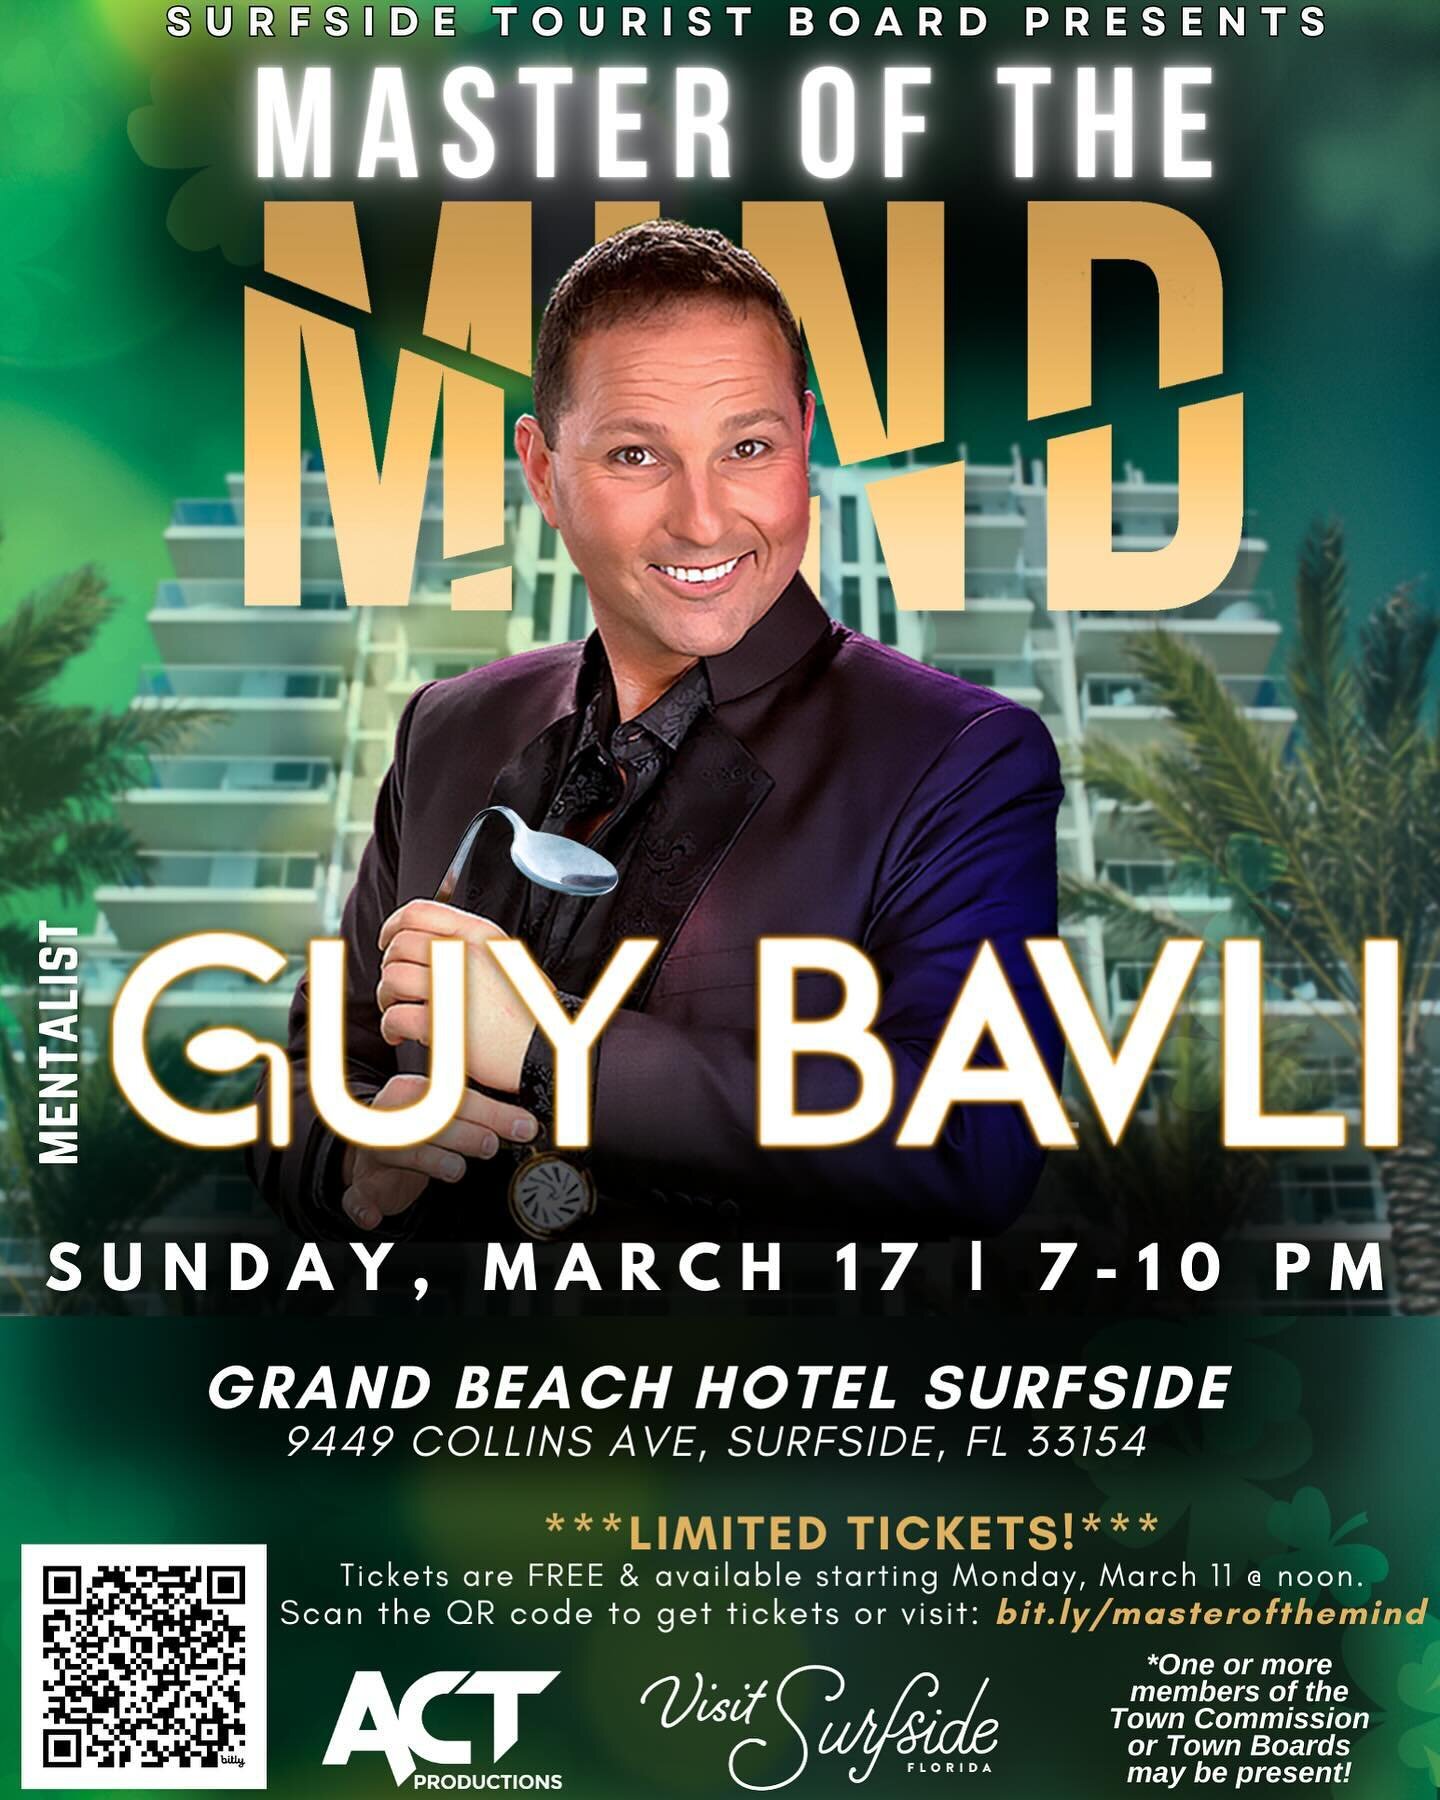 Celebrate St Patrick&rsquo;s with us!☘️

Performing live, Guy Bavli, a mind blowing show in Grand Beach Hotel Surfside. Free tickets go live Monday 11th, be on the lookout! 

(http://bit.ly/masterofthemind)